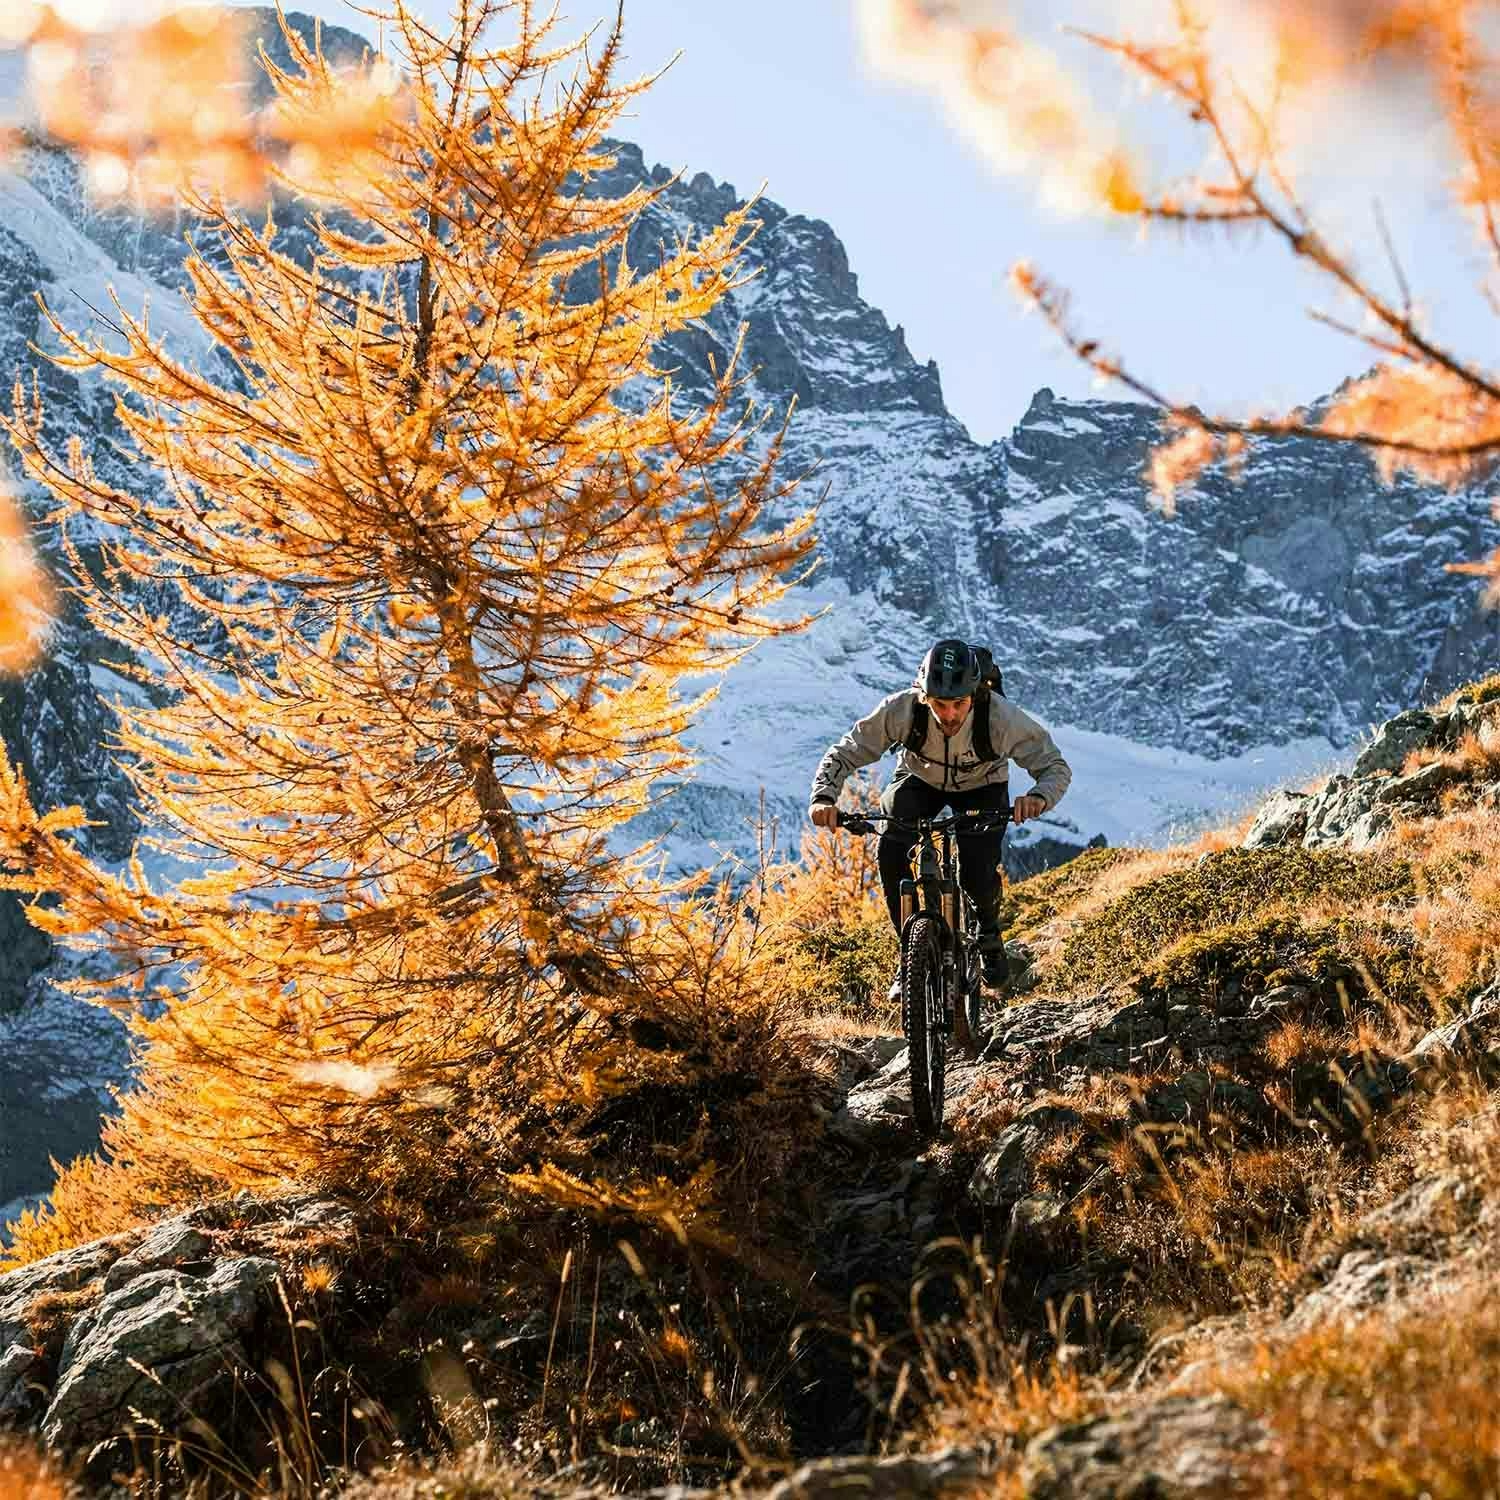 Loic D riding his mountain bike along a rocky trail with snowy mountains in the backdrop